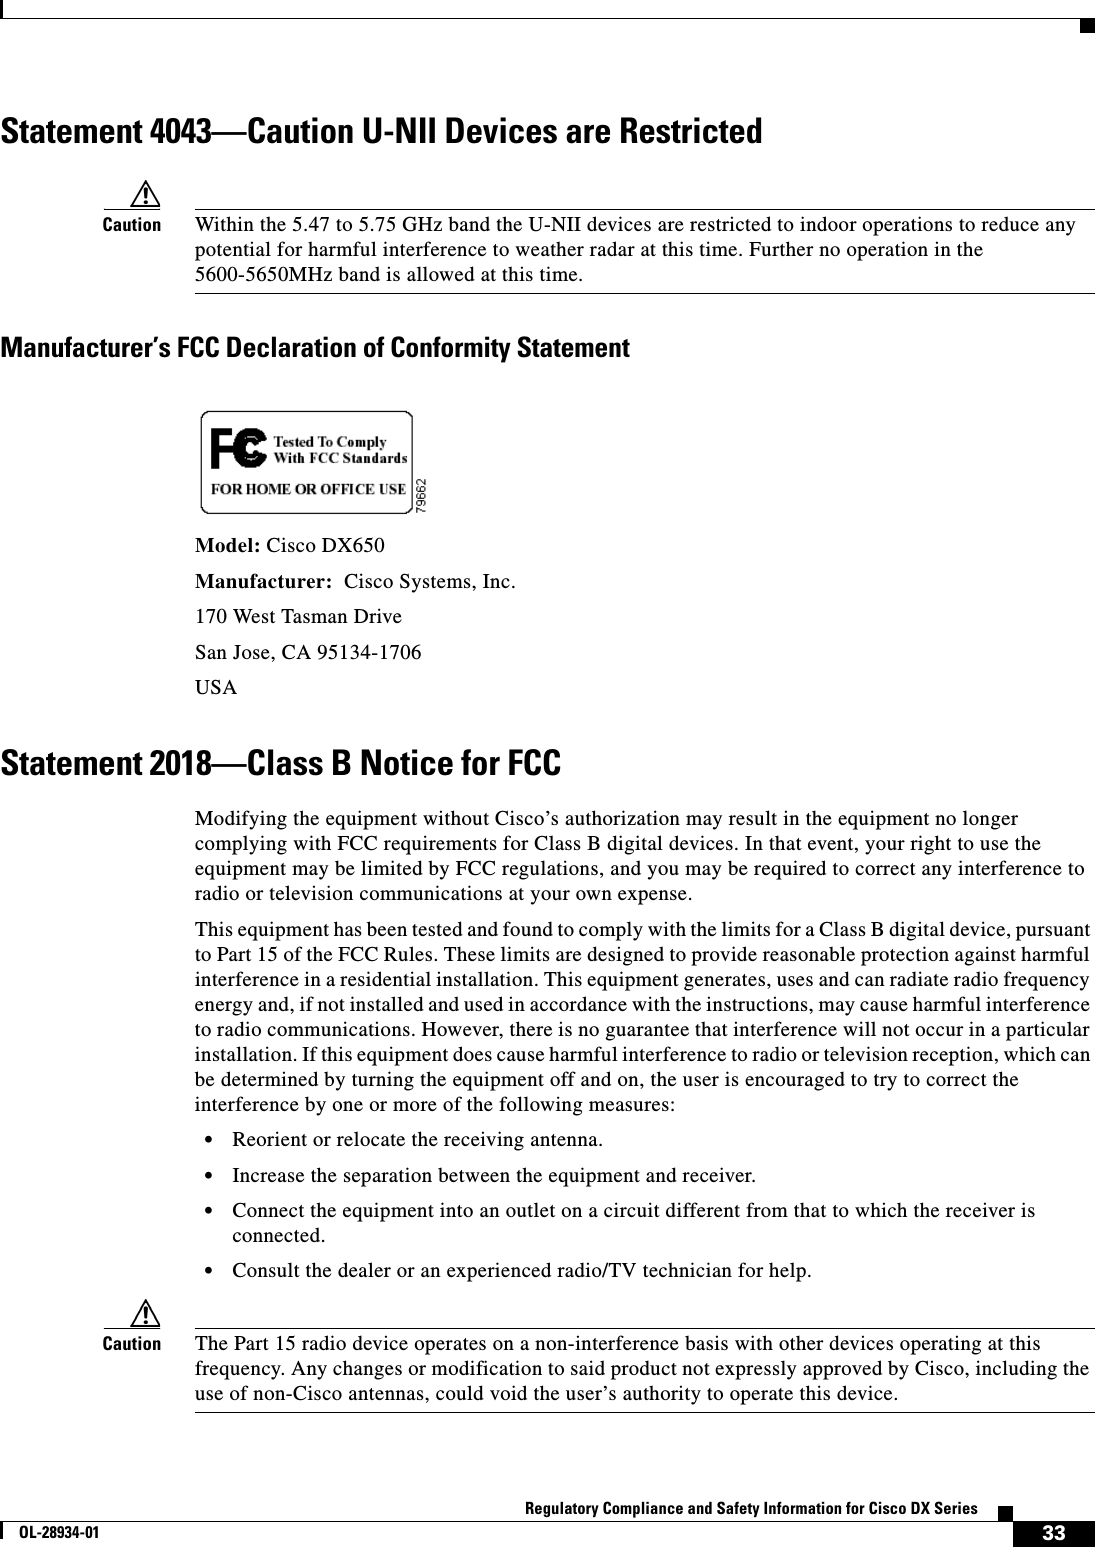  33Regulatory Compliance and Safety Information for Cisco DX SeriesOL-28934-01Statement 4043—Caution U-NII Devices are RestrictedCaution Within the 5.47 to 5.75 GHz band the U-NII devices are restricted to indoor operations to reduce any potential for harmful interference to weather radar at this time. Further no operation in the 5600-5650MHz band is allowed at this time.Manufacturer’s FCC Declaration of Conformity StatementModel: Cisco DX650Manufacturer:  Cisco Systems, Inc.170 West Tasman DriveSan Jose, CA 95134-1706USAStatement 2018—Class B Notice for FCCModifying the equipment without Cisco’s authorization may result in the equipment no longer complying with FCC requirements for Class B digital devices. In that event, your right to use the equipment may be limited by FCC regulations, and you may be required to correct any interference to radio or television communications at your own expense.This equipment has been tested and found to comply with the limits for a Class B digital device, pursuant to Part 15 of the FCC Rules. These limits are designed to provide reasonable protection against harmful interference in a residential installation. This equipment generates, uses and can radiate radio frequency energy and, if not installed and used in accordance with the instructions, may cause harmful interference to radio communications. However, there is no guarantee that interference will not occur in a particular installation. If this equipment does cause harmful interference to radio or television reception, which can be determined by turning the equipment off and on, the user is encouraged to try to correct the interference by one or more of the following measures:•Reorient or relocate the receiving antenna.•Increase the separation between the equipment and receiver.•Connect the equipment into an outlet on a circuit different from that to which the receiver is connected.•Consult the dealer or an experienced radio/TV technician for help.Caution The Part 15 radio device operates on a non-interference basis with other devices operating at this frequency. Any changes or modification to said product not expressly approved by Cisco, including the use of non-Cisco antennas, could void the user’s authority to operate this device.